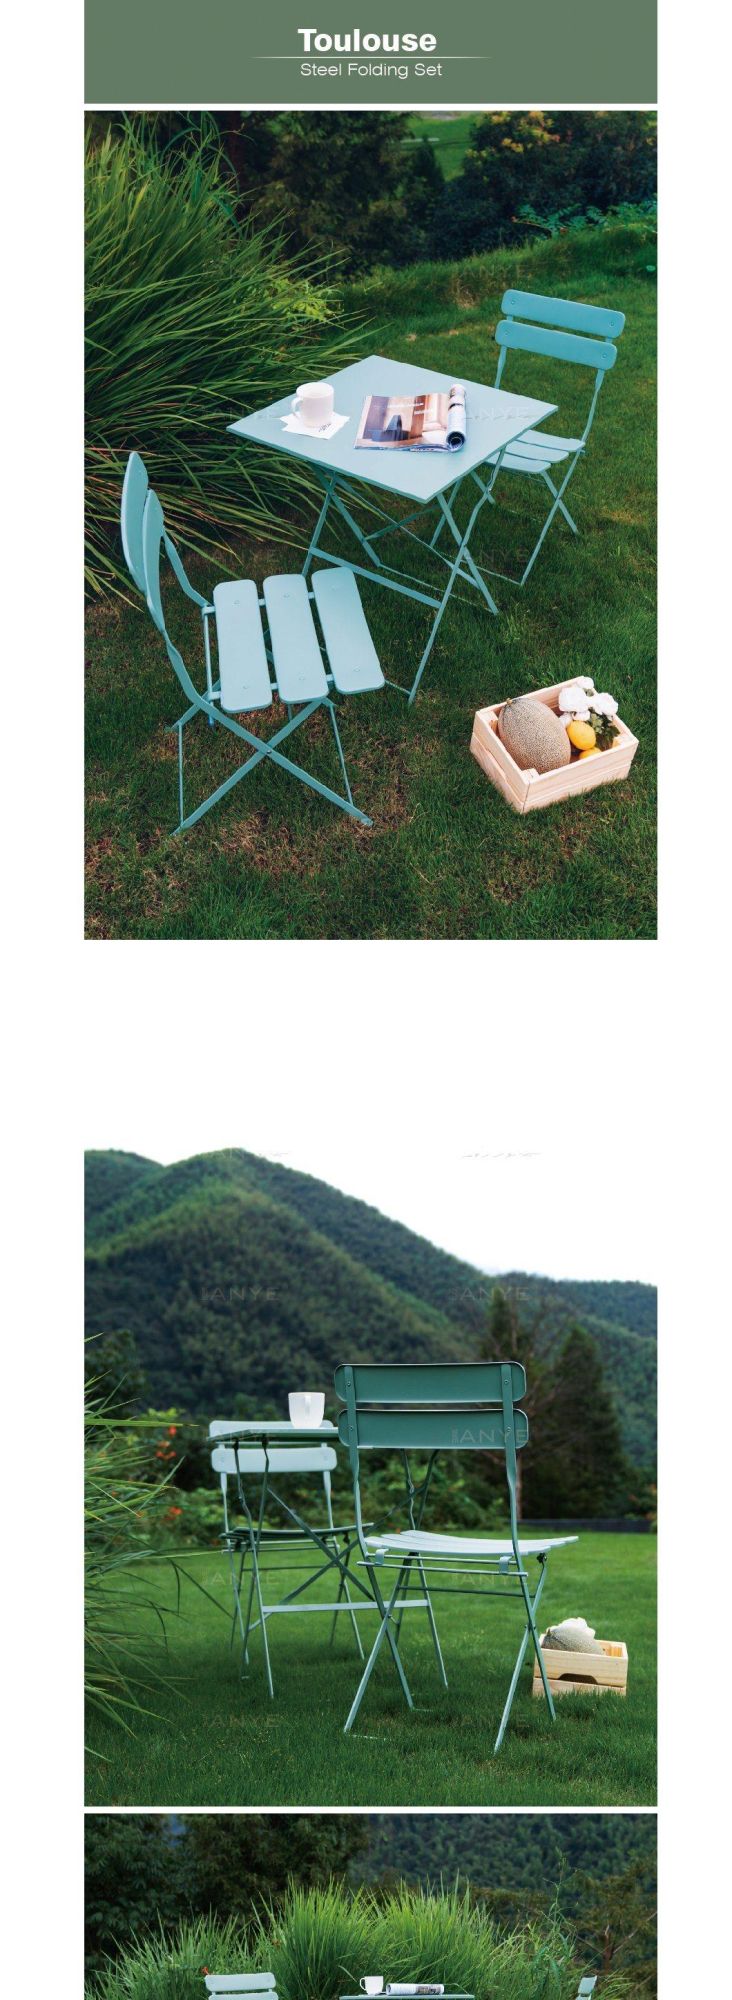 Modern Furniture Set Garden Portable Furniture Set Space Saving Foldable Dining Table and Chair